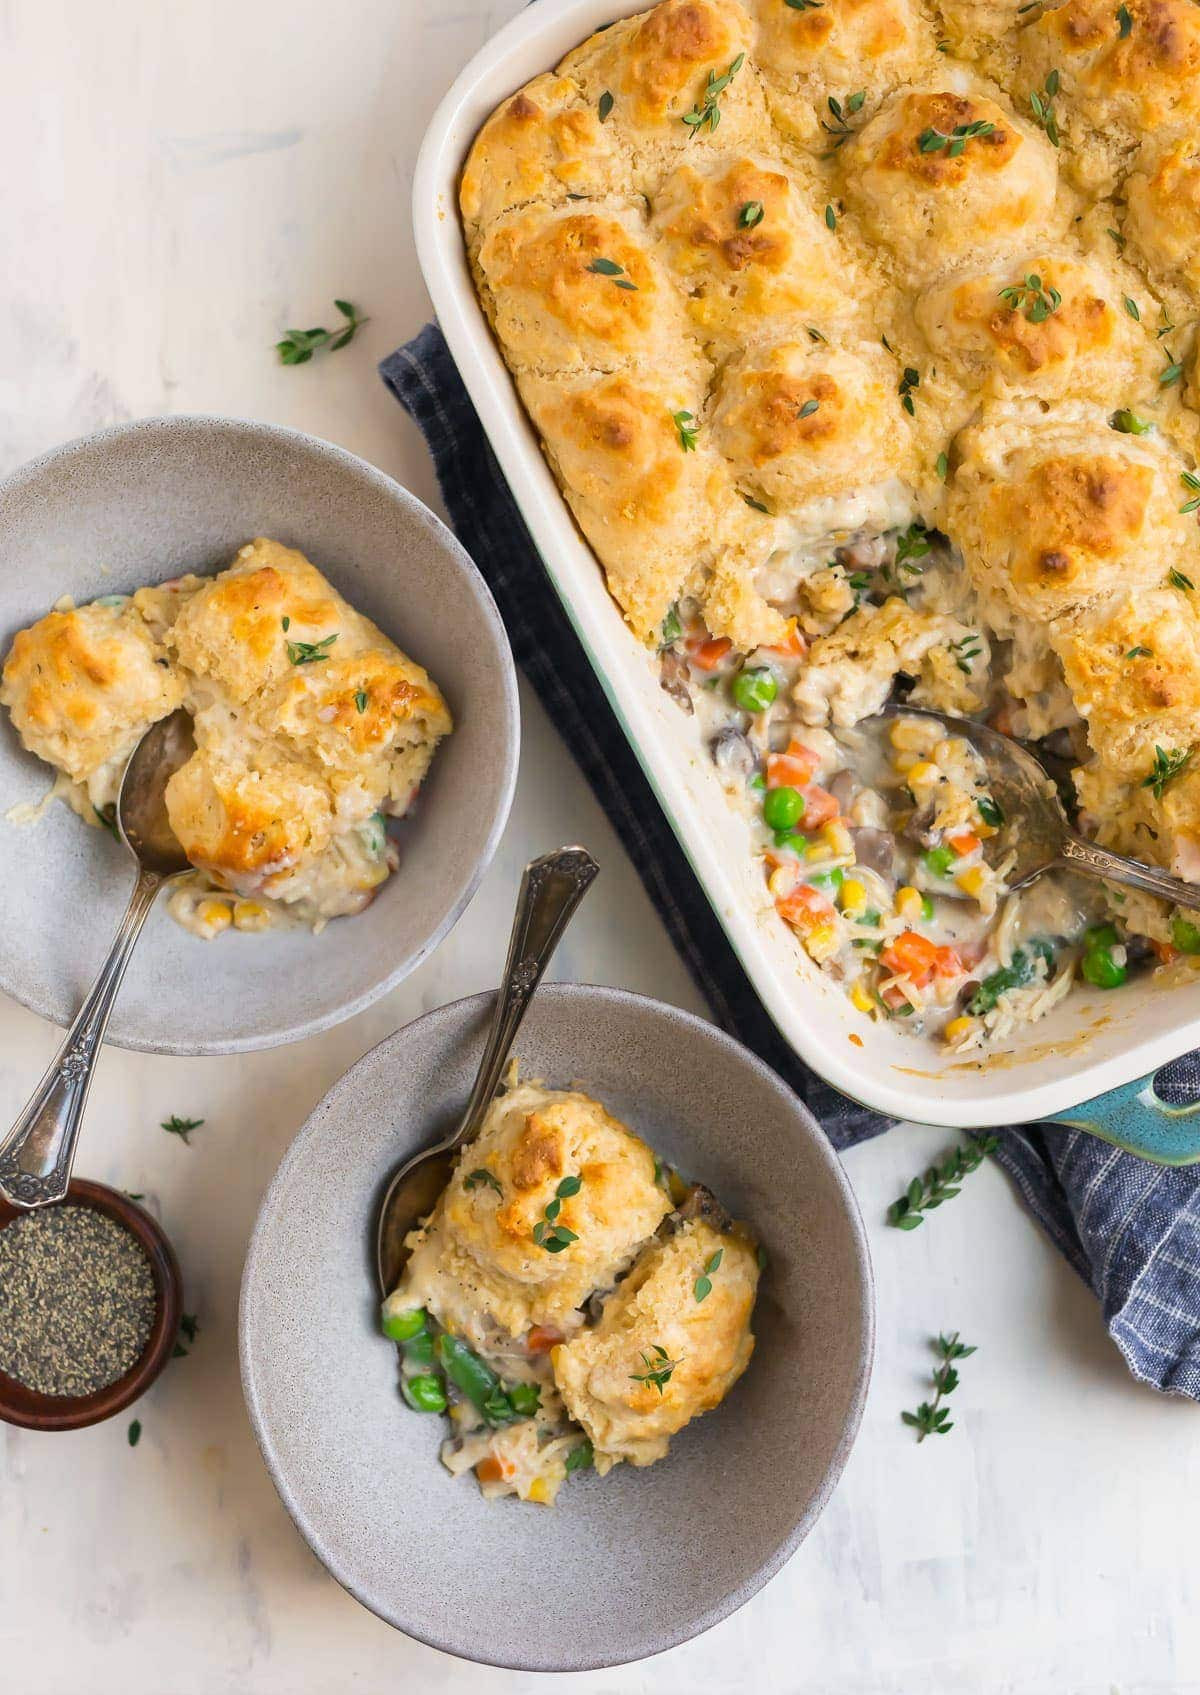 Biscuit Casserole Recipes
 Chicken and Biscuits